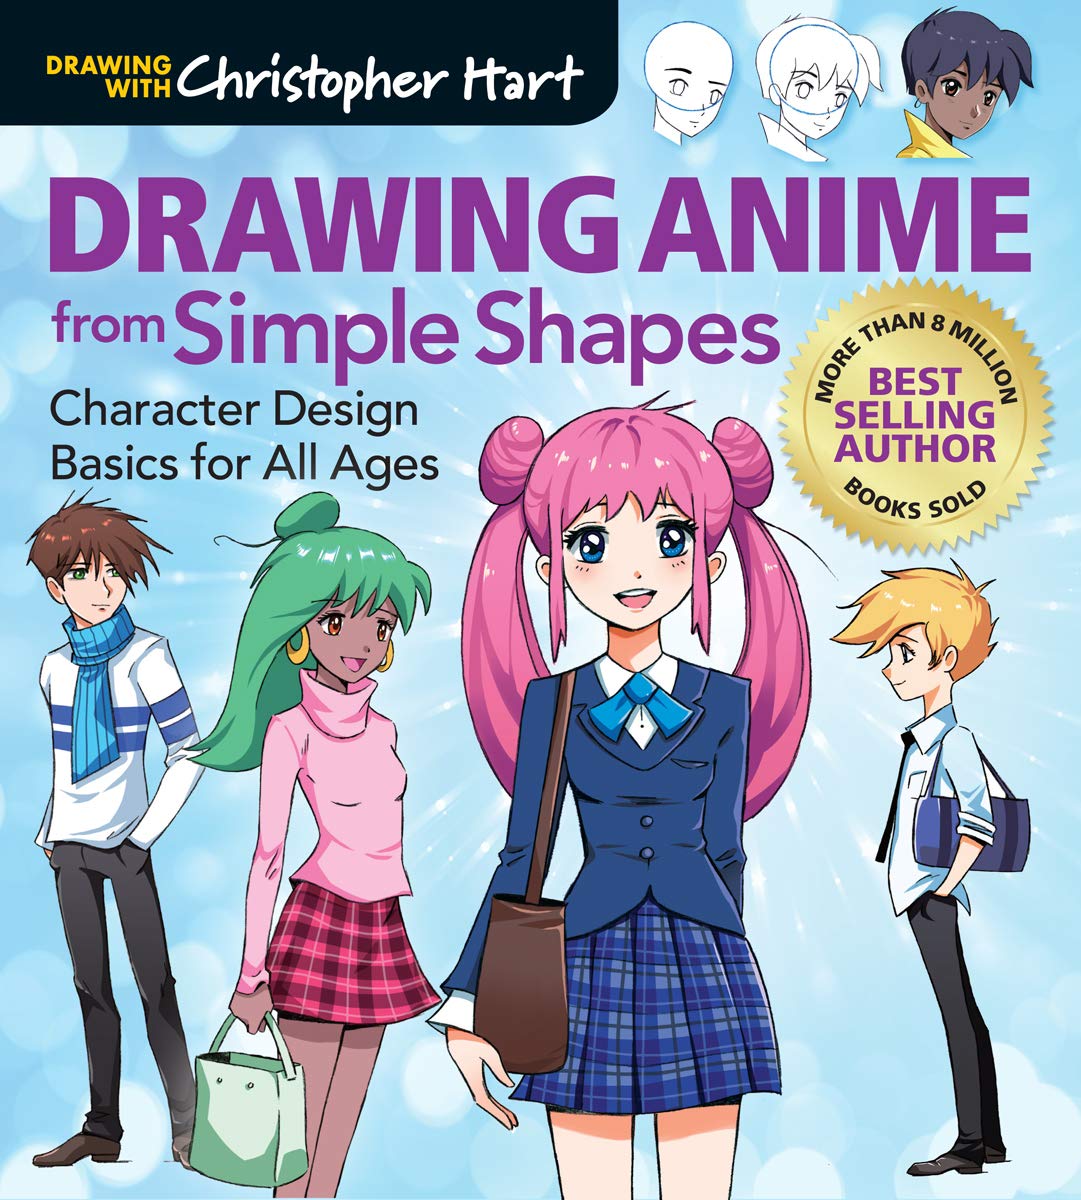 Drawing Anime from Simple Shapes | Christopher Hart